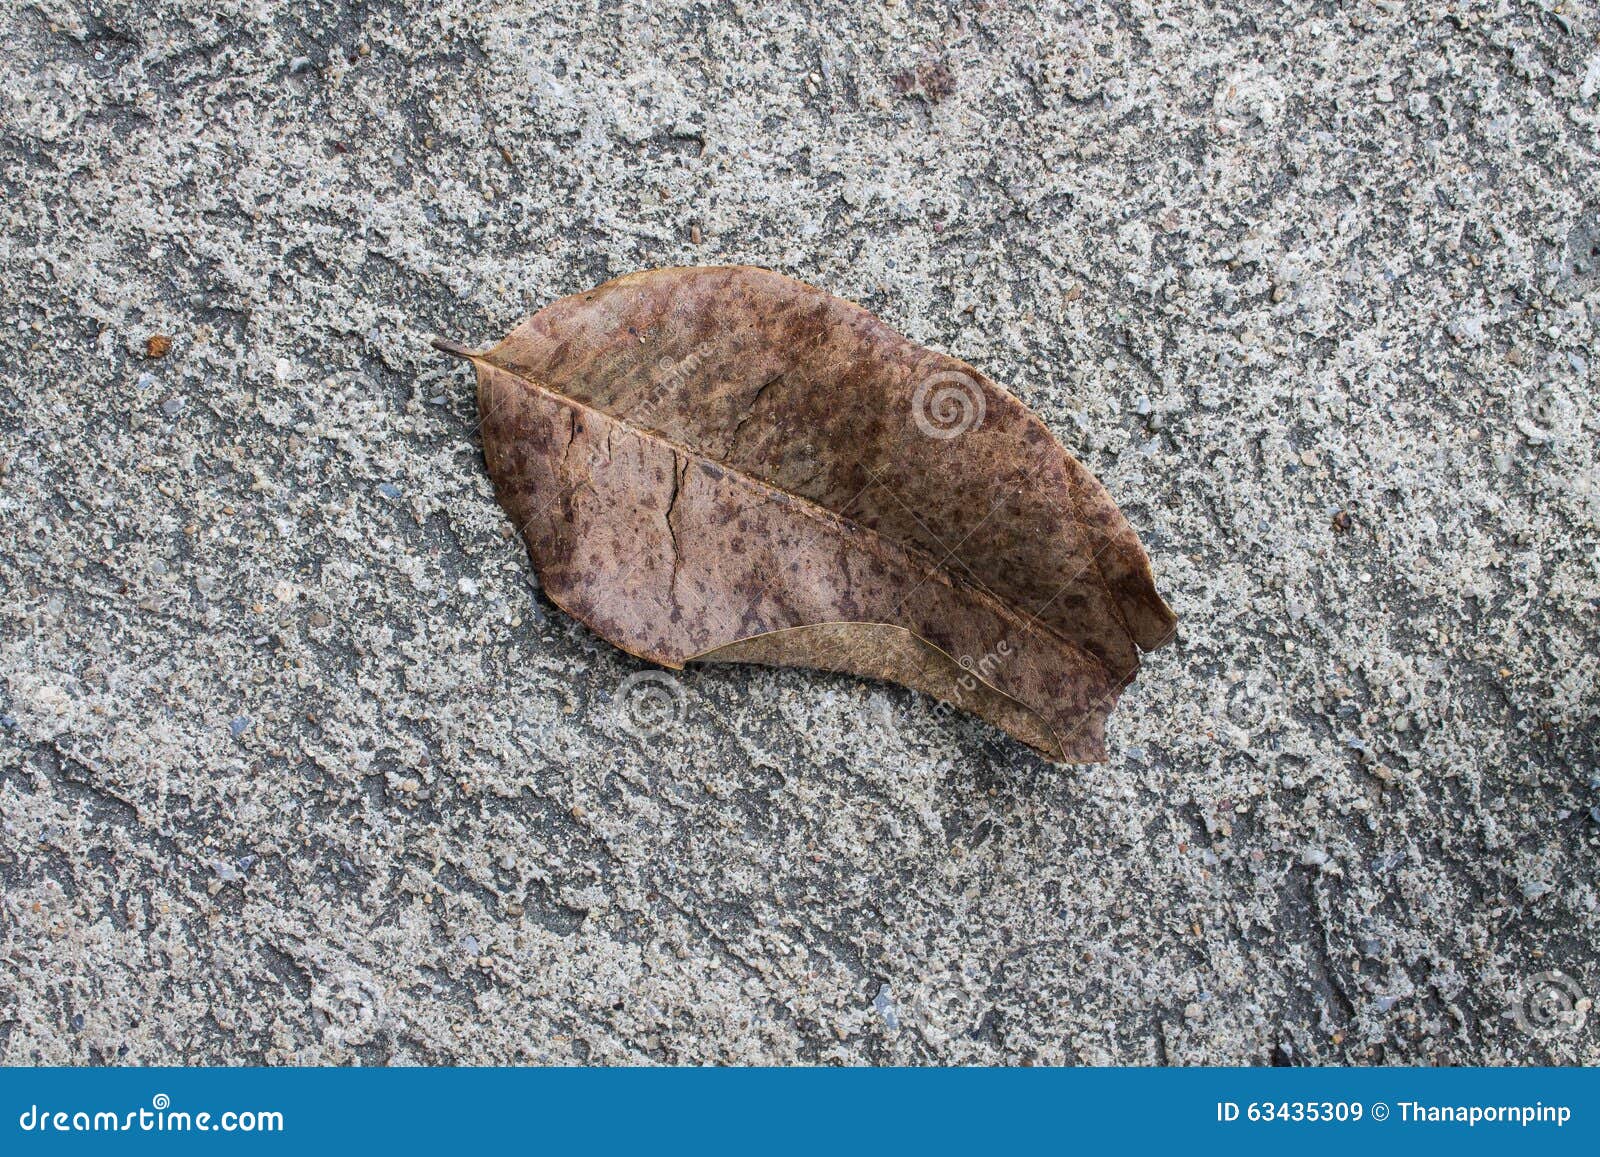 Dried Leaf on Concrete Floor Stock Image - Image of asian, stress: 63435309